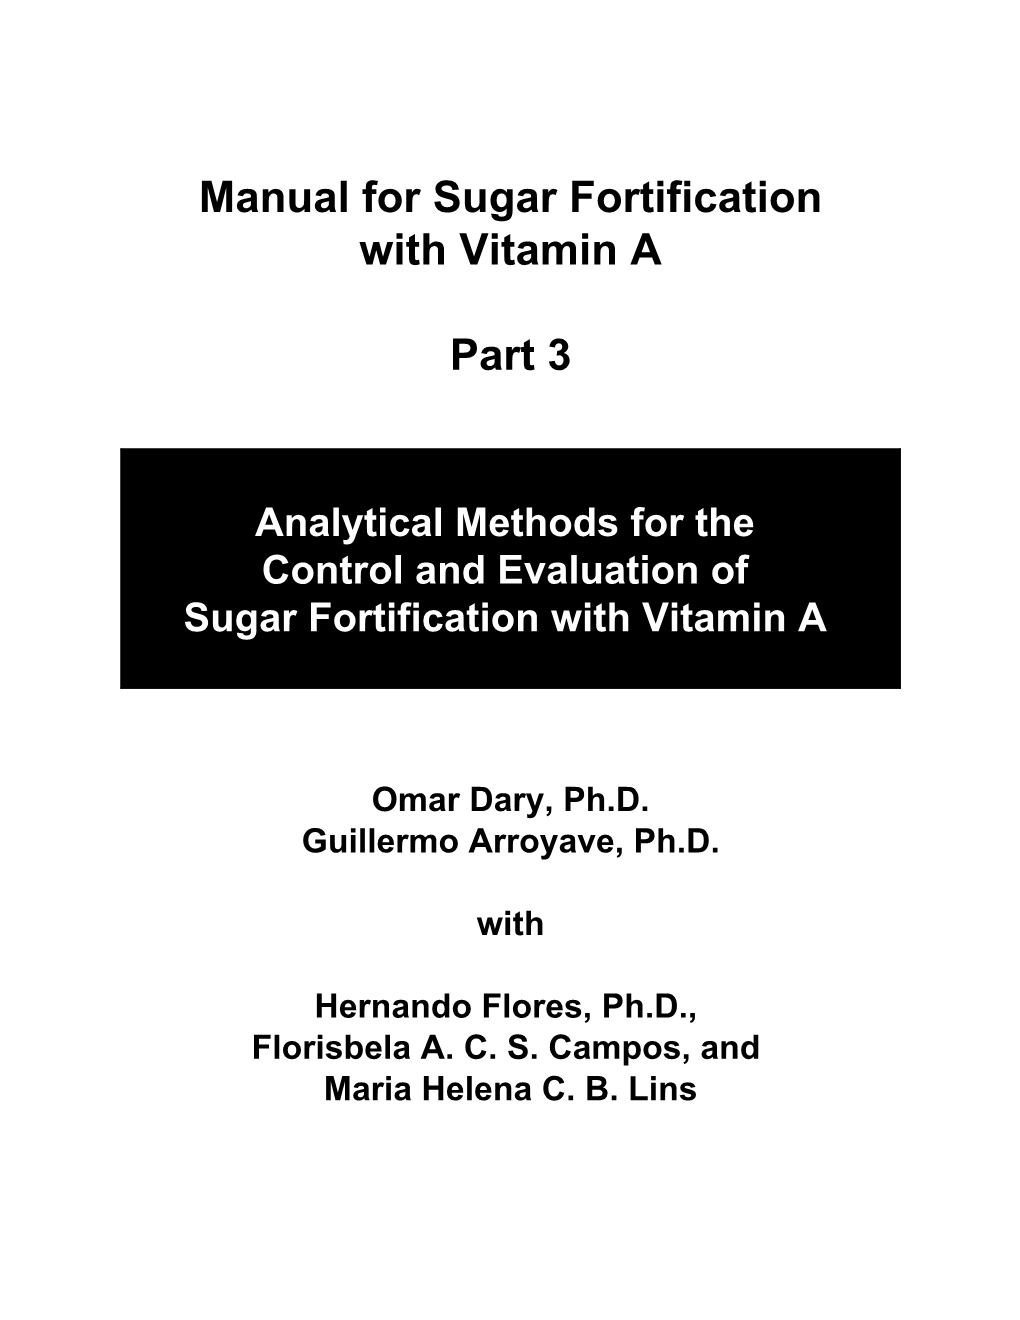 Manual for Sugar Fortification with Vitamin a Part 3